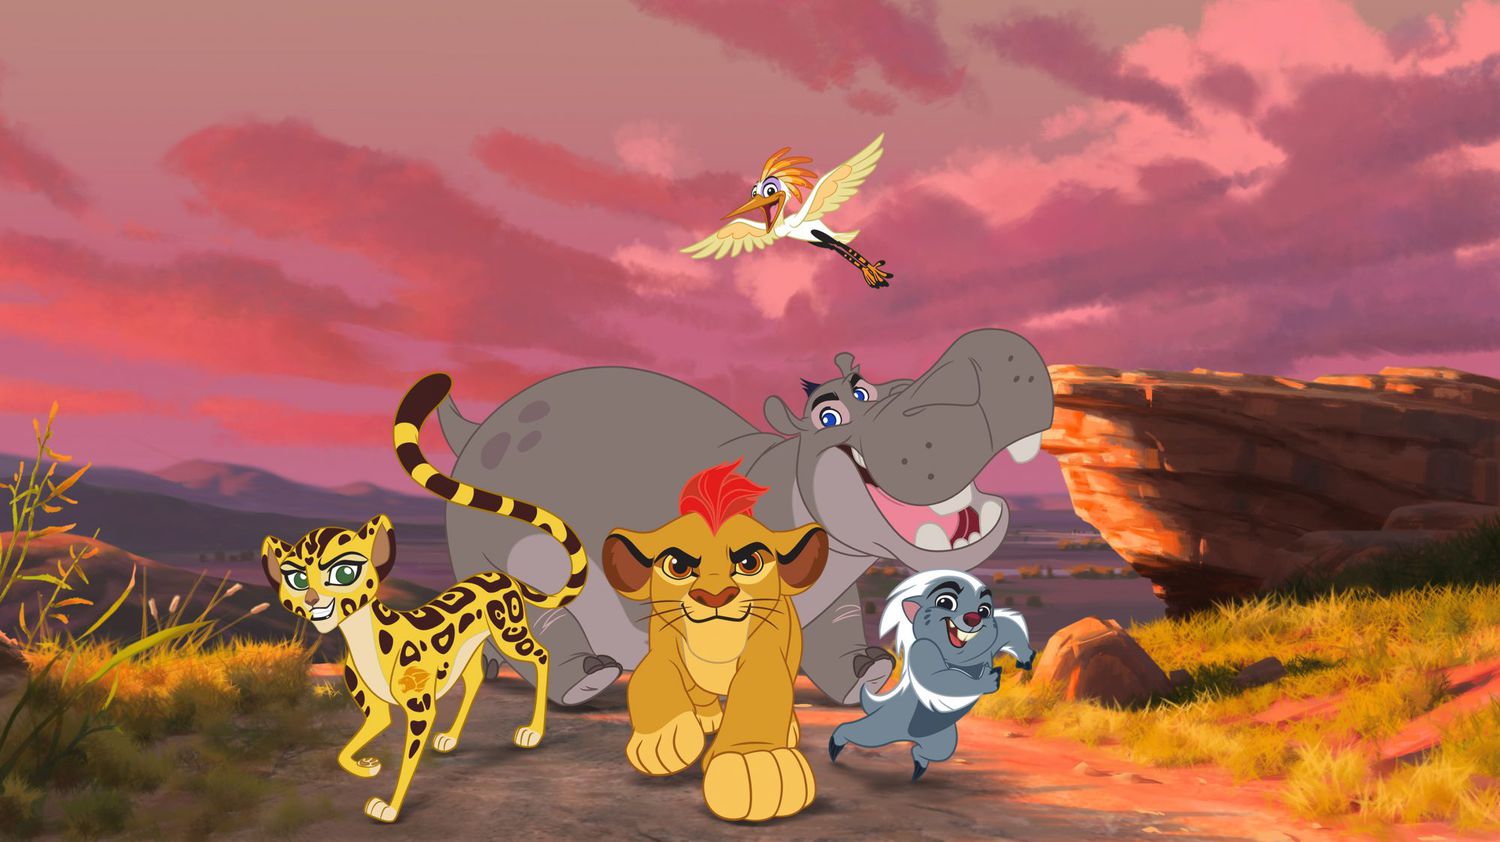 Lion King spin-off voice cast includes Rob Lowe, Gabrielle Union, James  Earl Jones, and more 